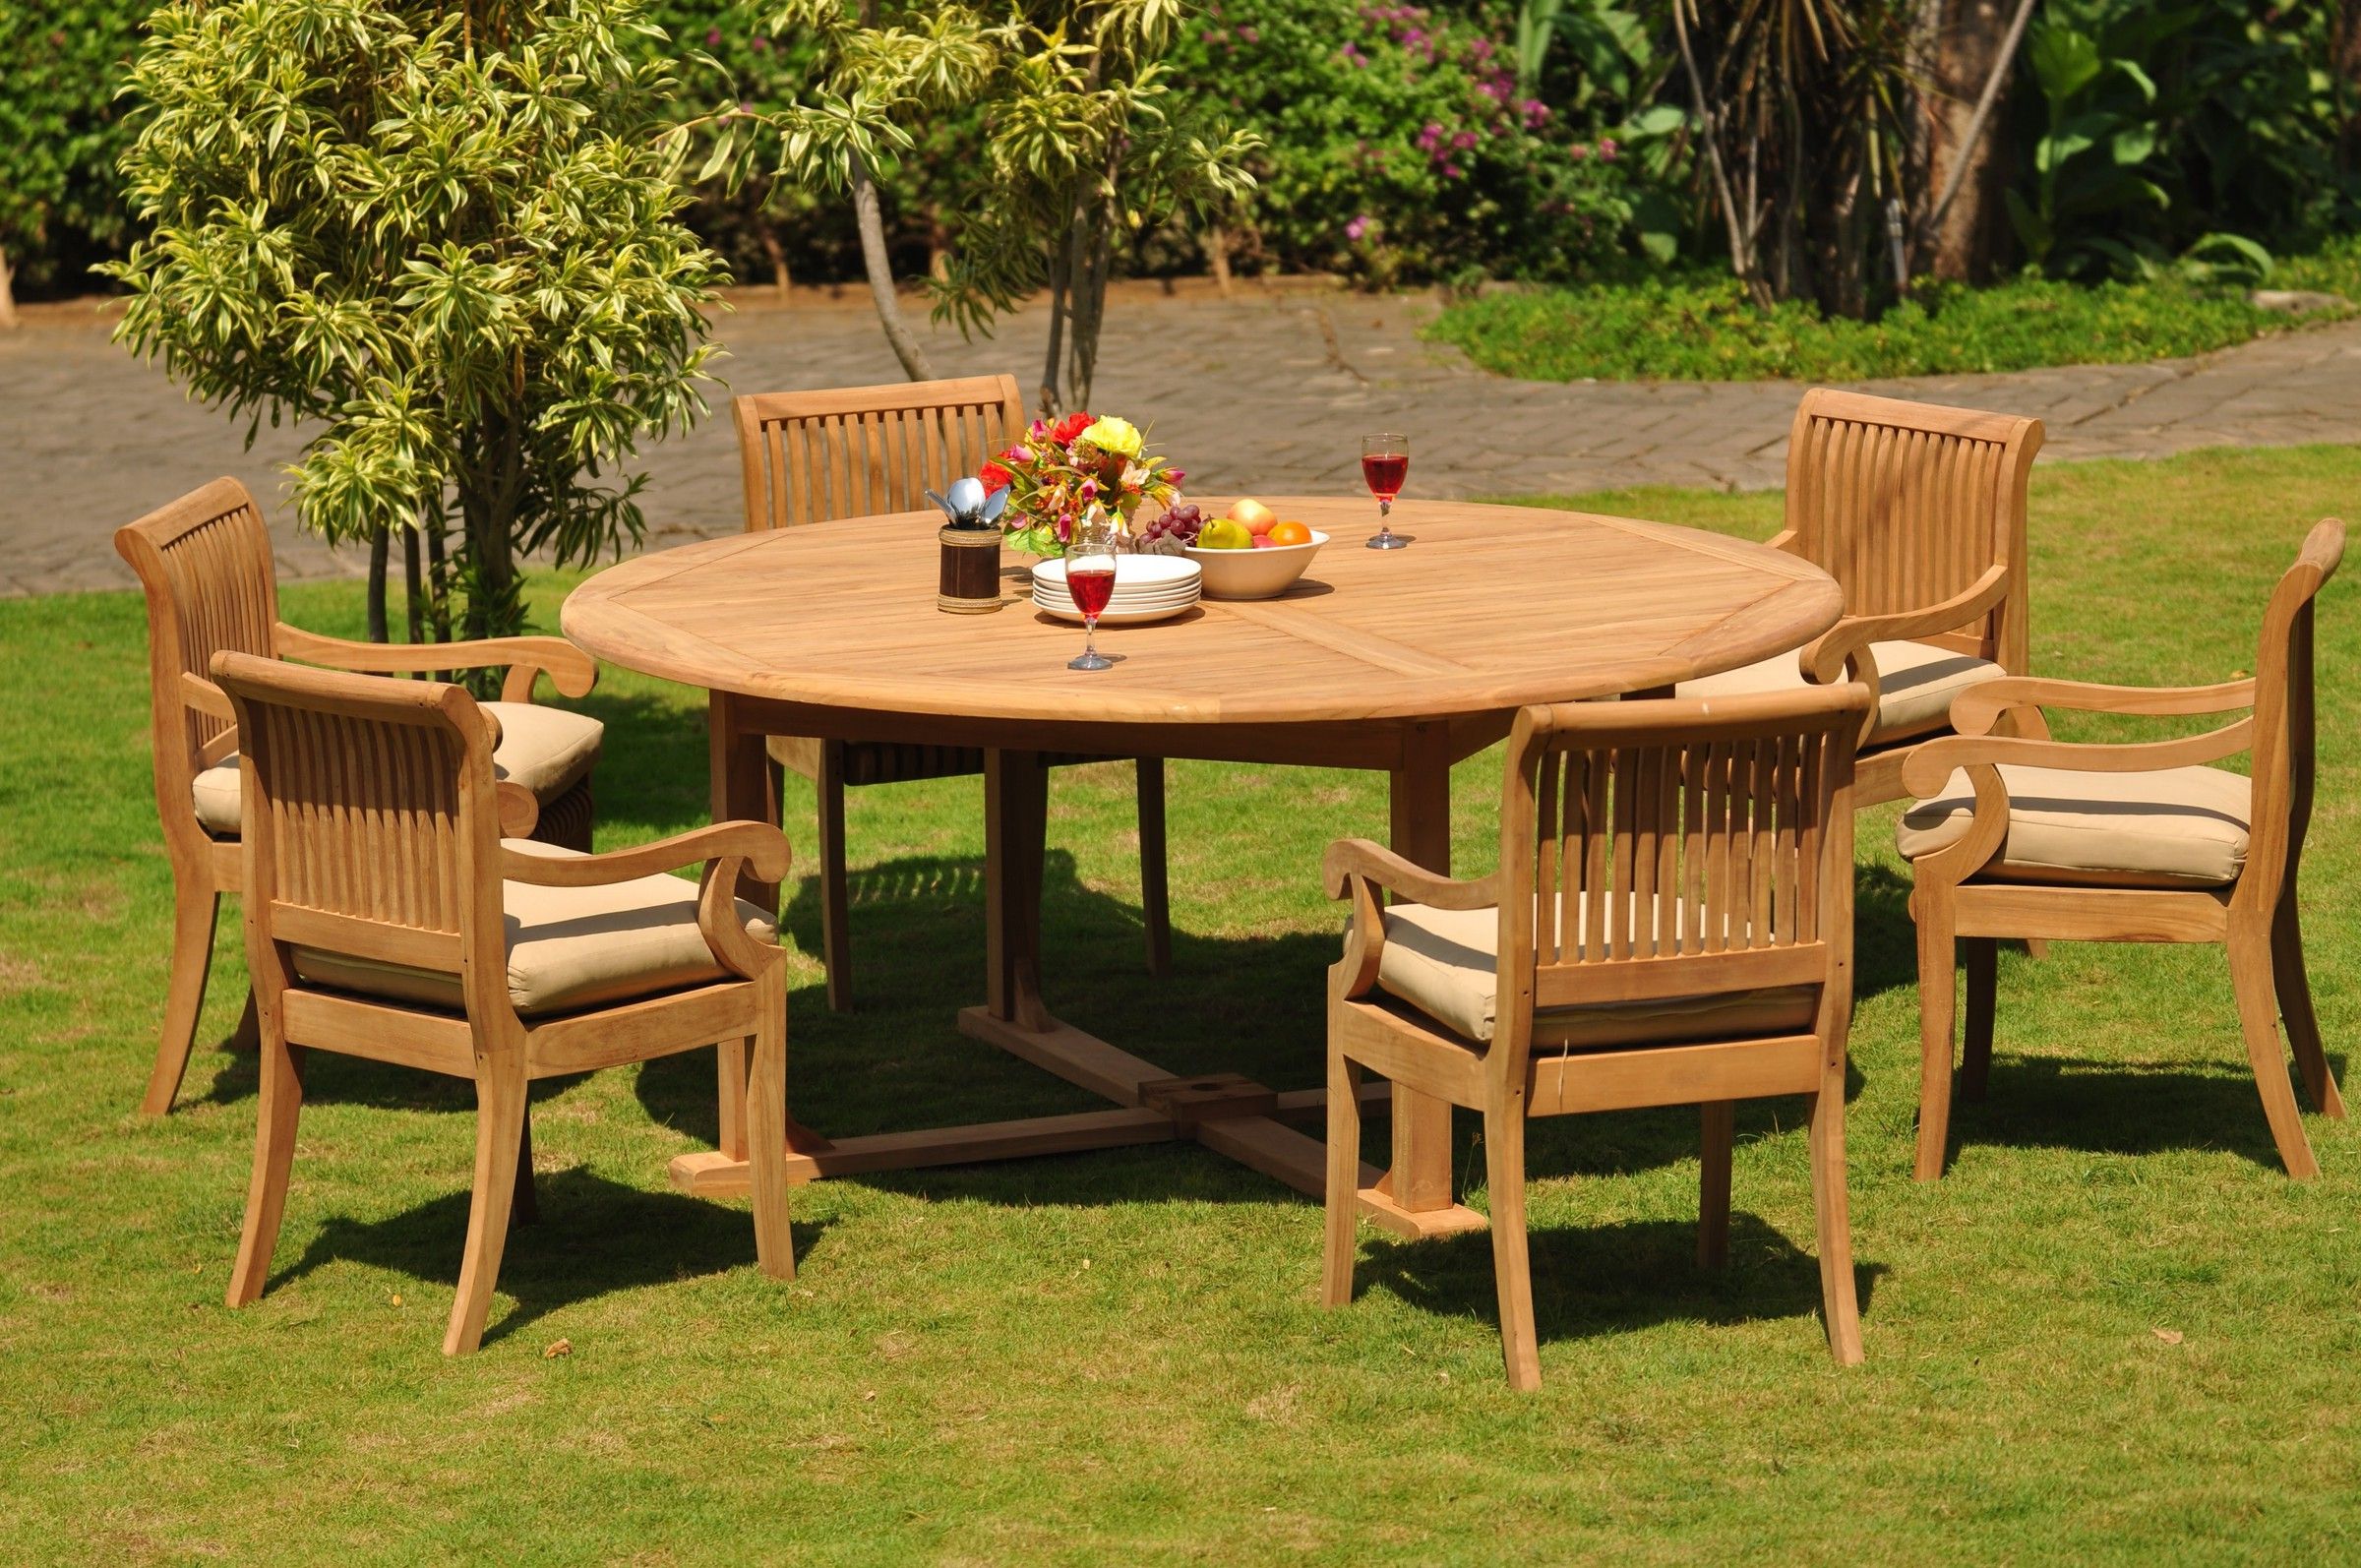 Widely Used Teak Outdoor Loungers Sets Within Teak Dining Set: 6 Seater 7 Pc: 72" Round Table And 6 Giva Arm Chairs (View 1 of 15)